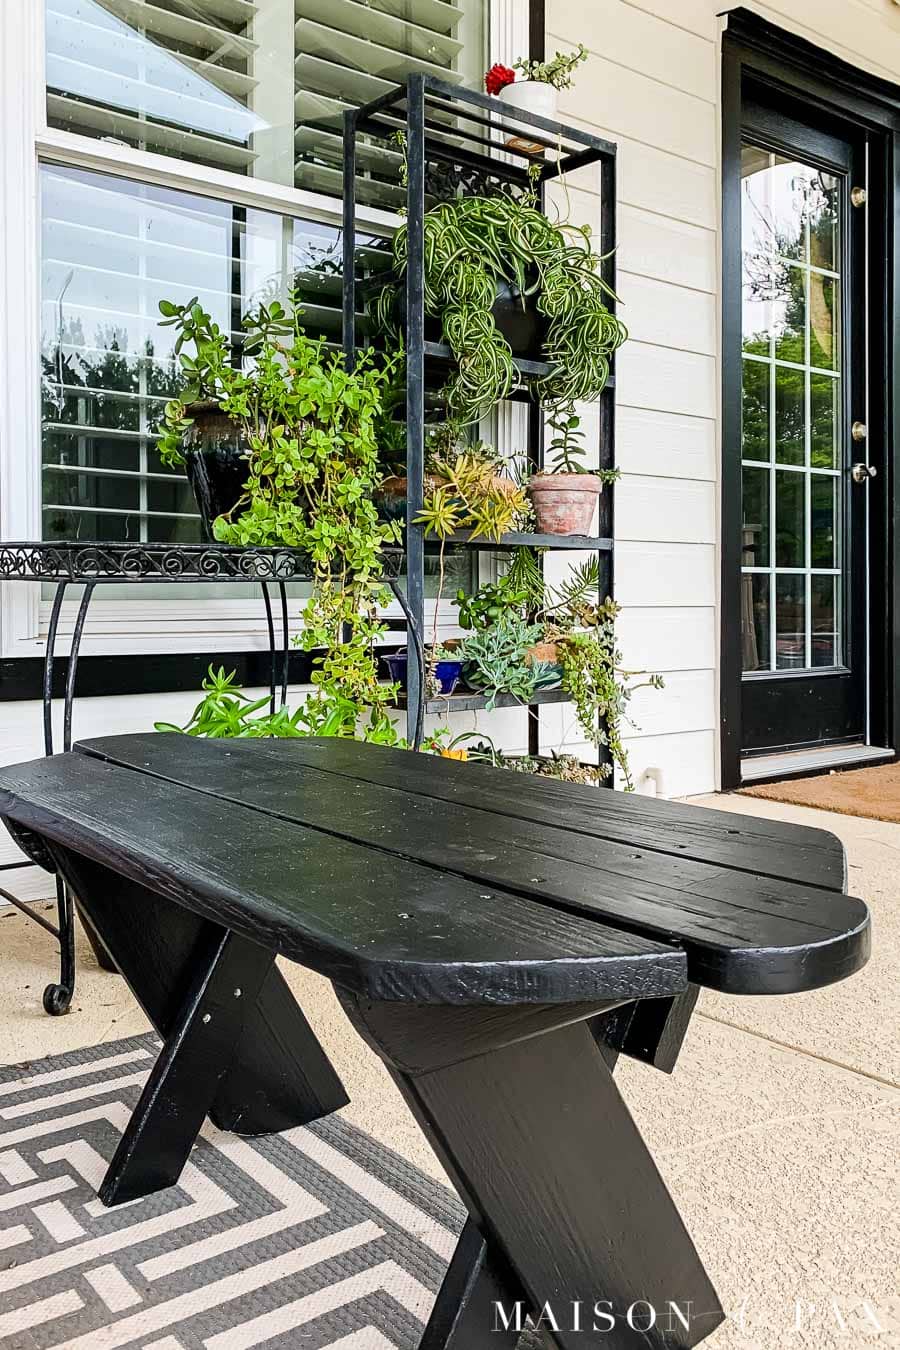 How To Paint Outdoor Wood Furniture, Best Outdoor Paint For Wood Furniture